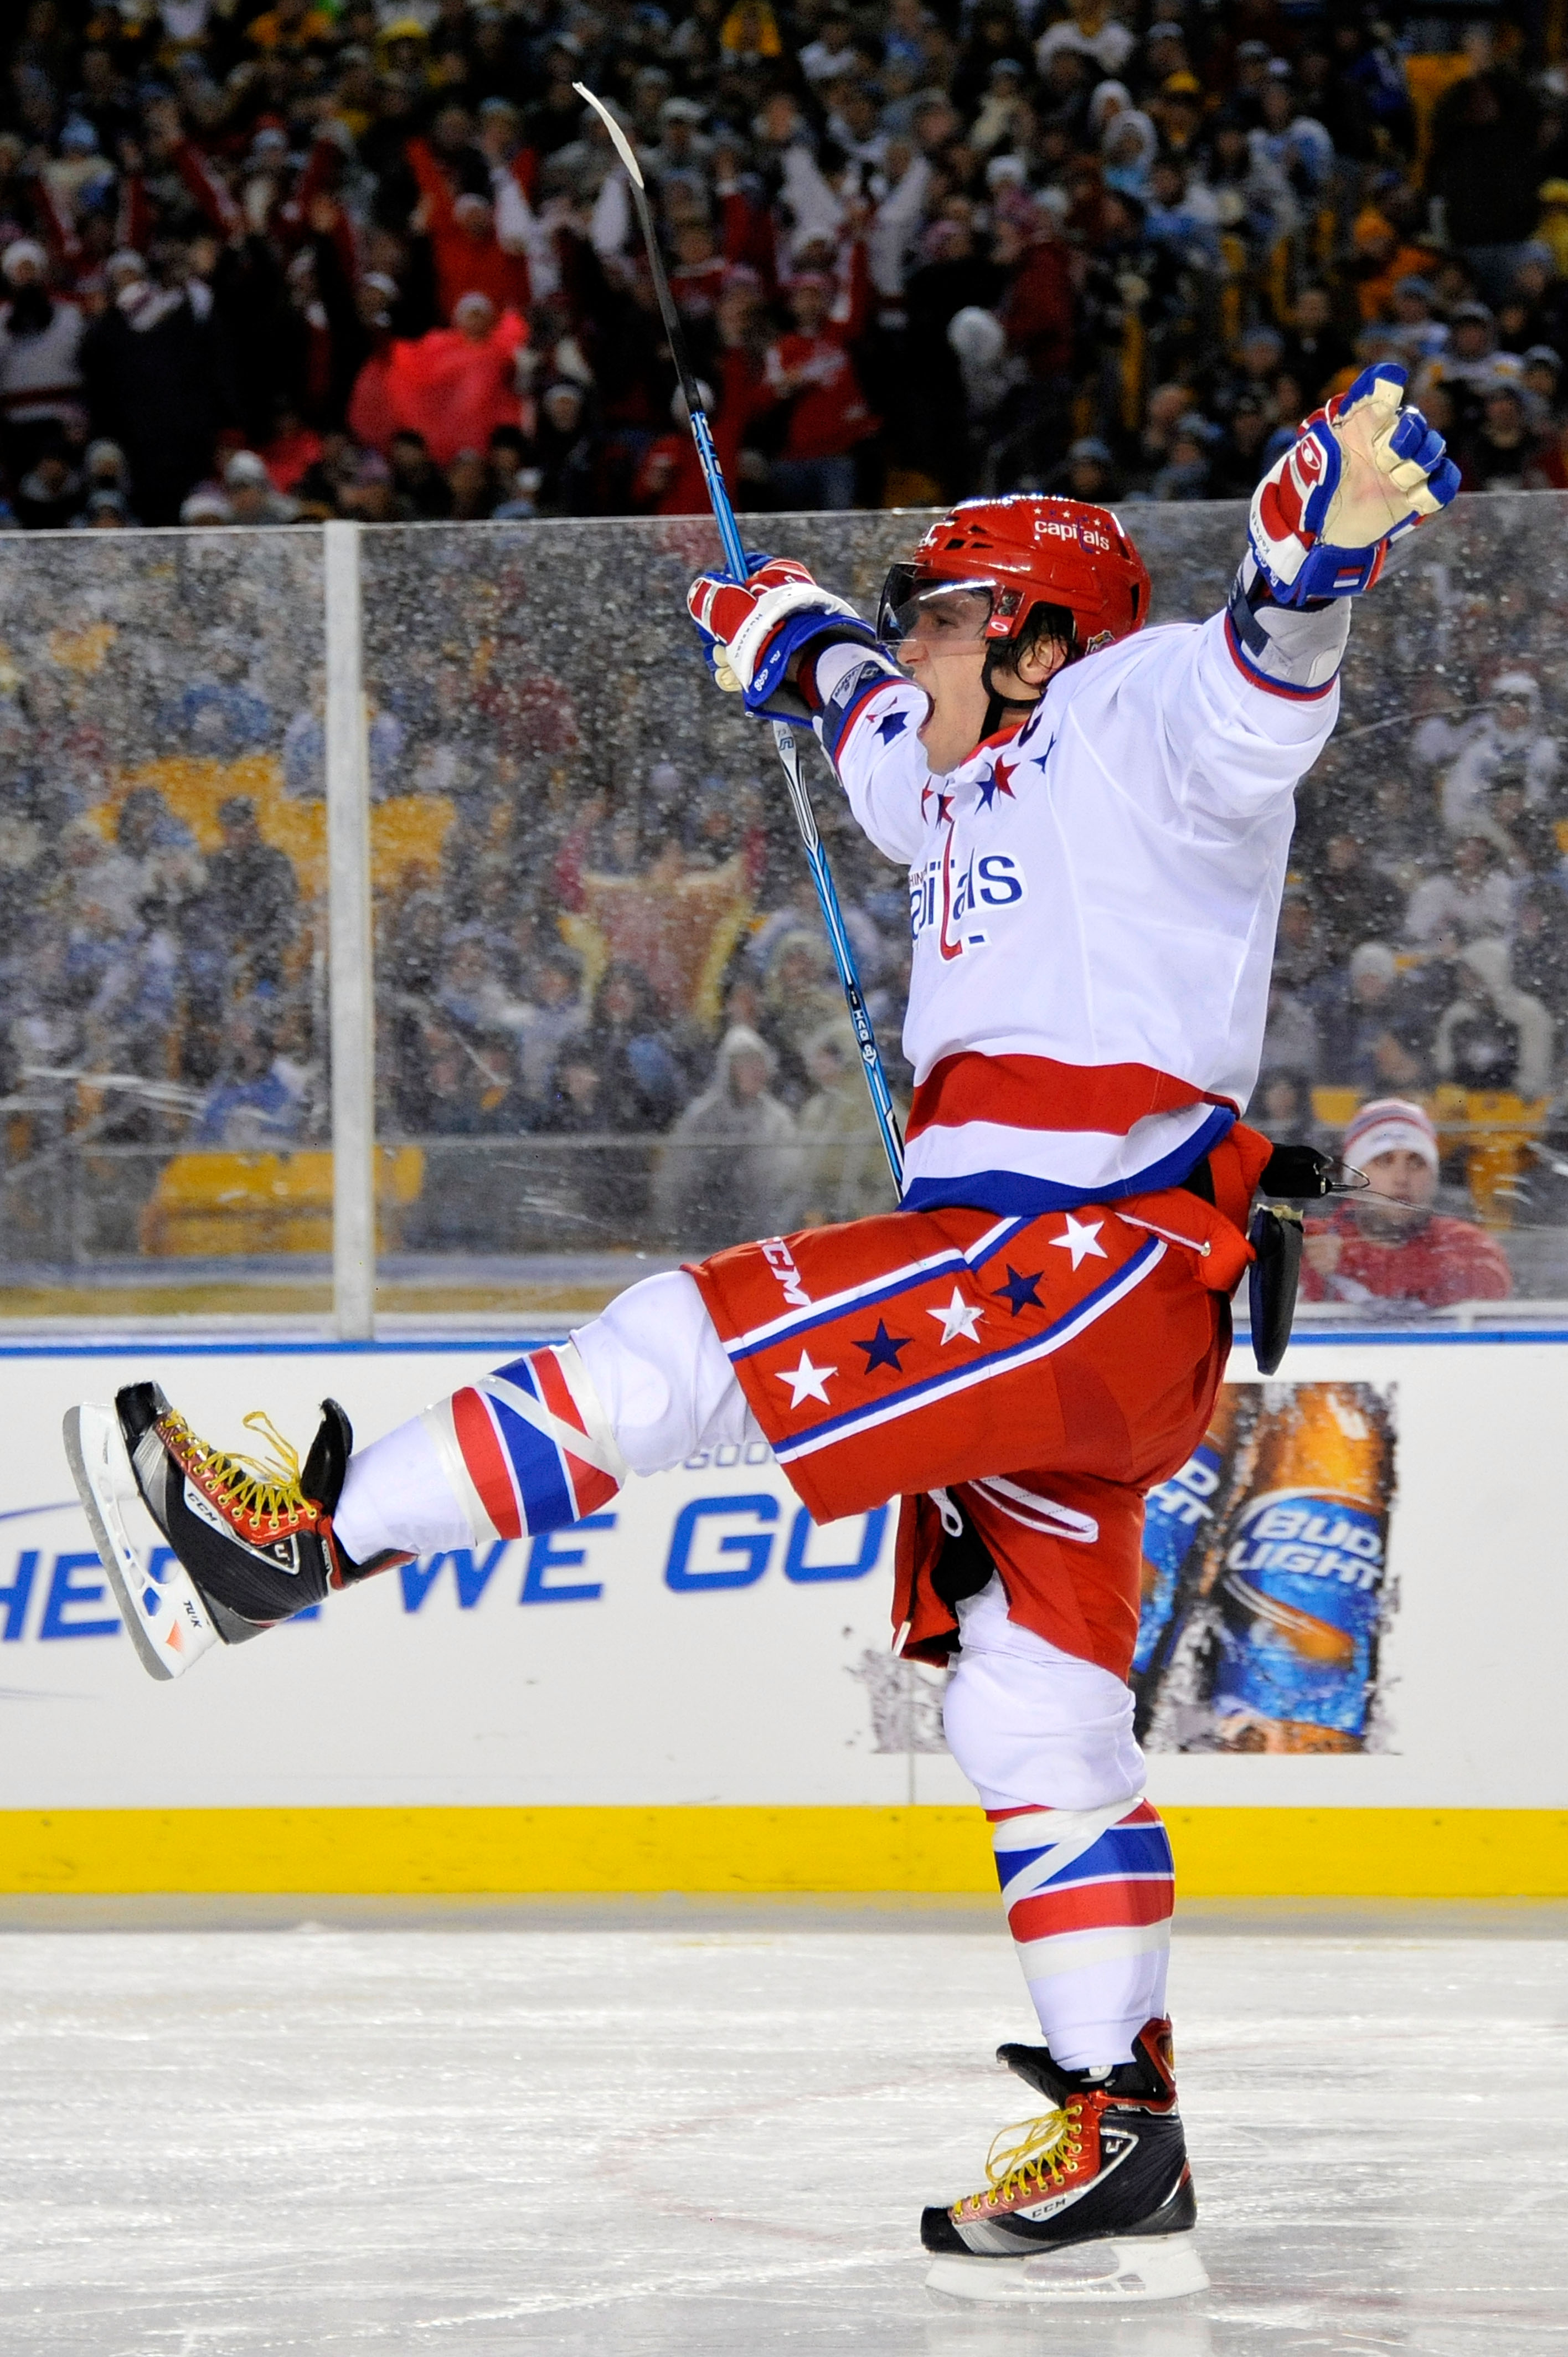 Captivating Moments from Hockey's Snowtastic Winter Classic